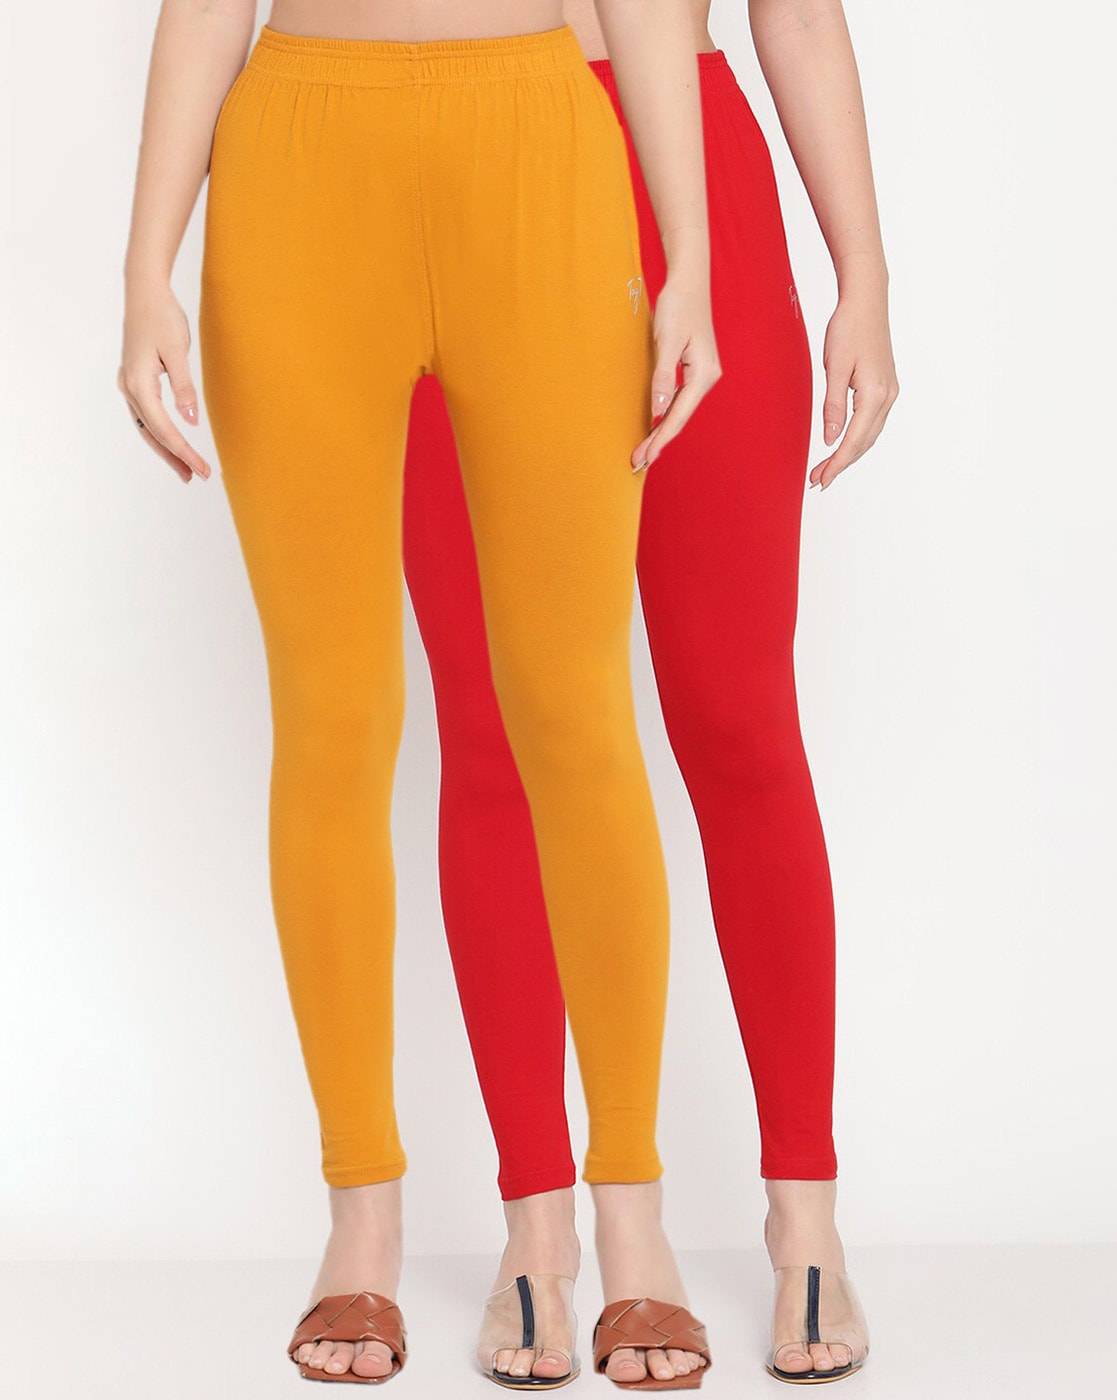 Yellow Solid Ankle Length Plus Legging - VALLES365 by S.C. - 4145009